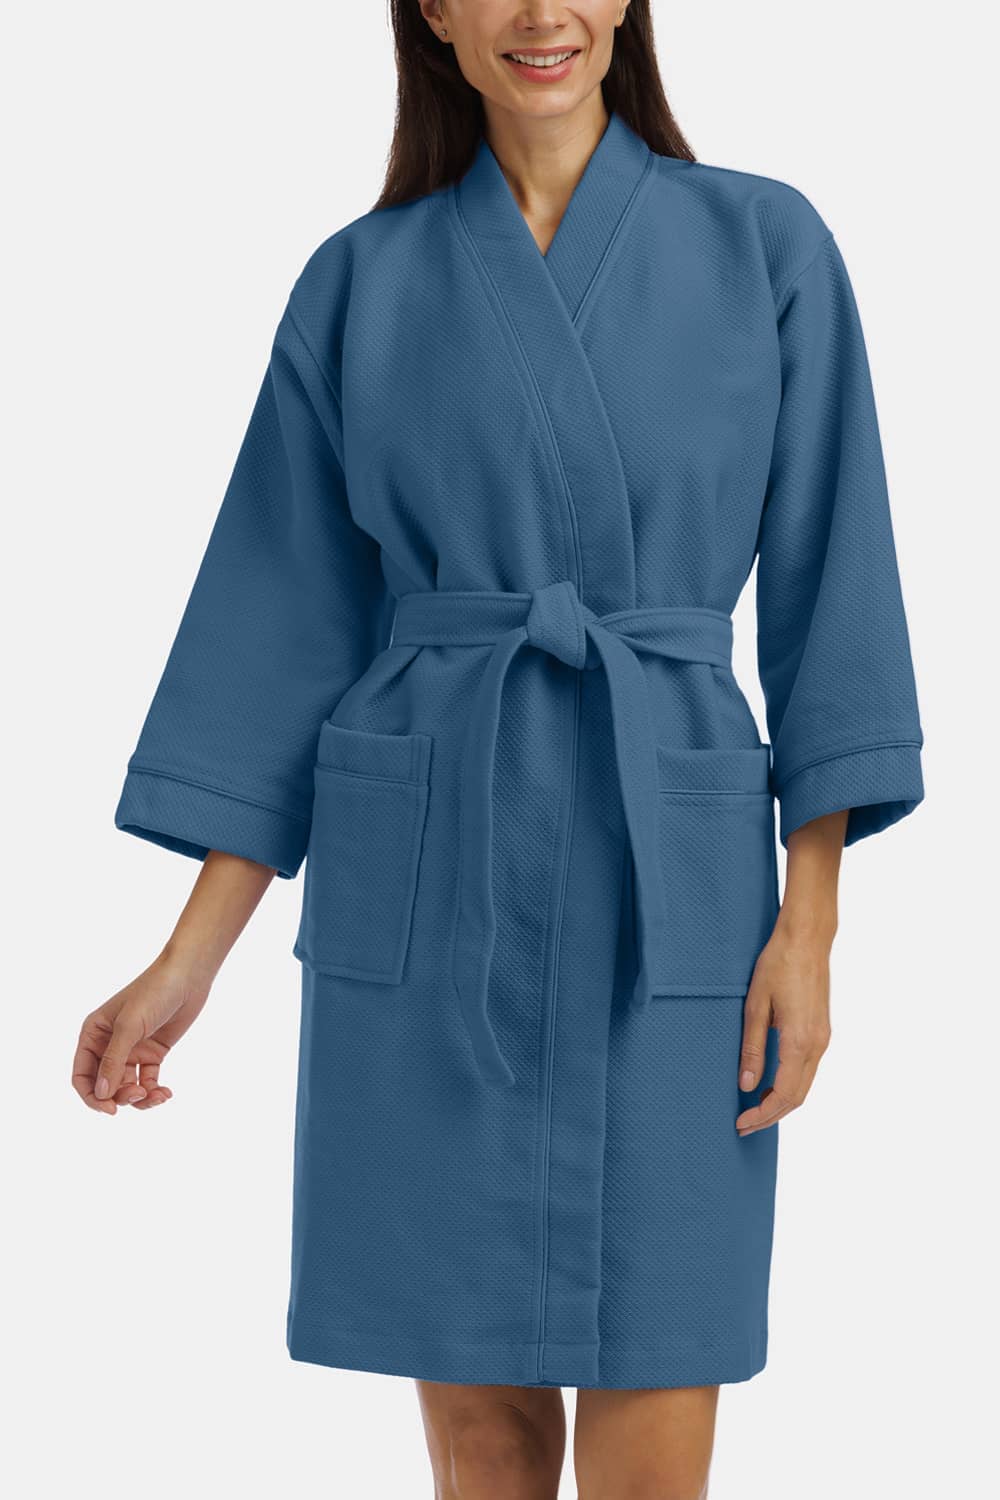 Women's Modal Kimono Resort Spa Robe with Quilted Design Womens>Sleep and Lounge>Robe Fishers Finery Moonlight Blue X-Small 